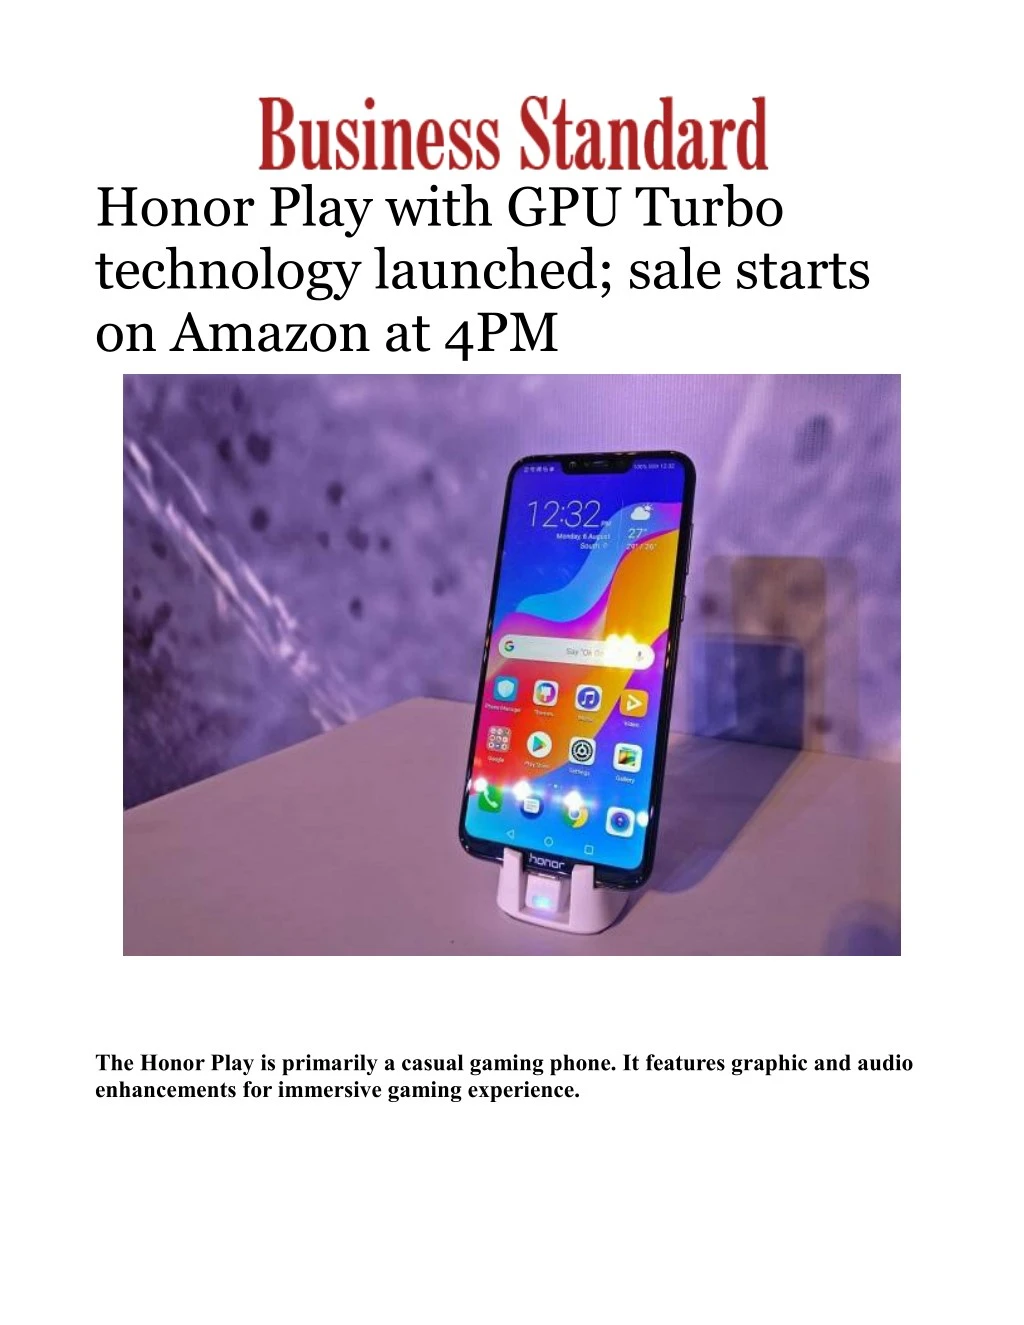 honor play with gpu turbo technology launched